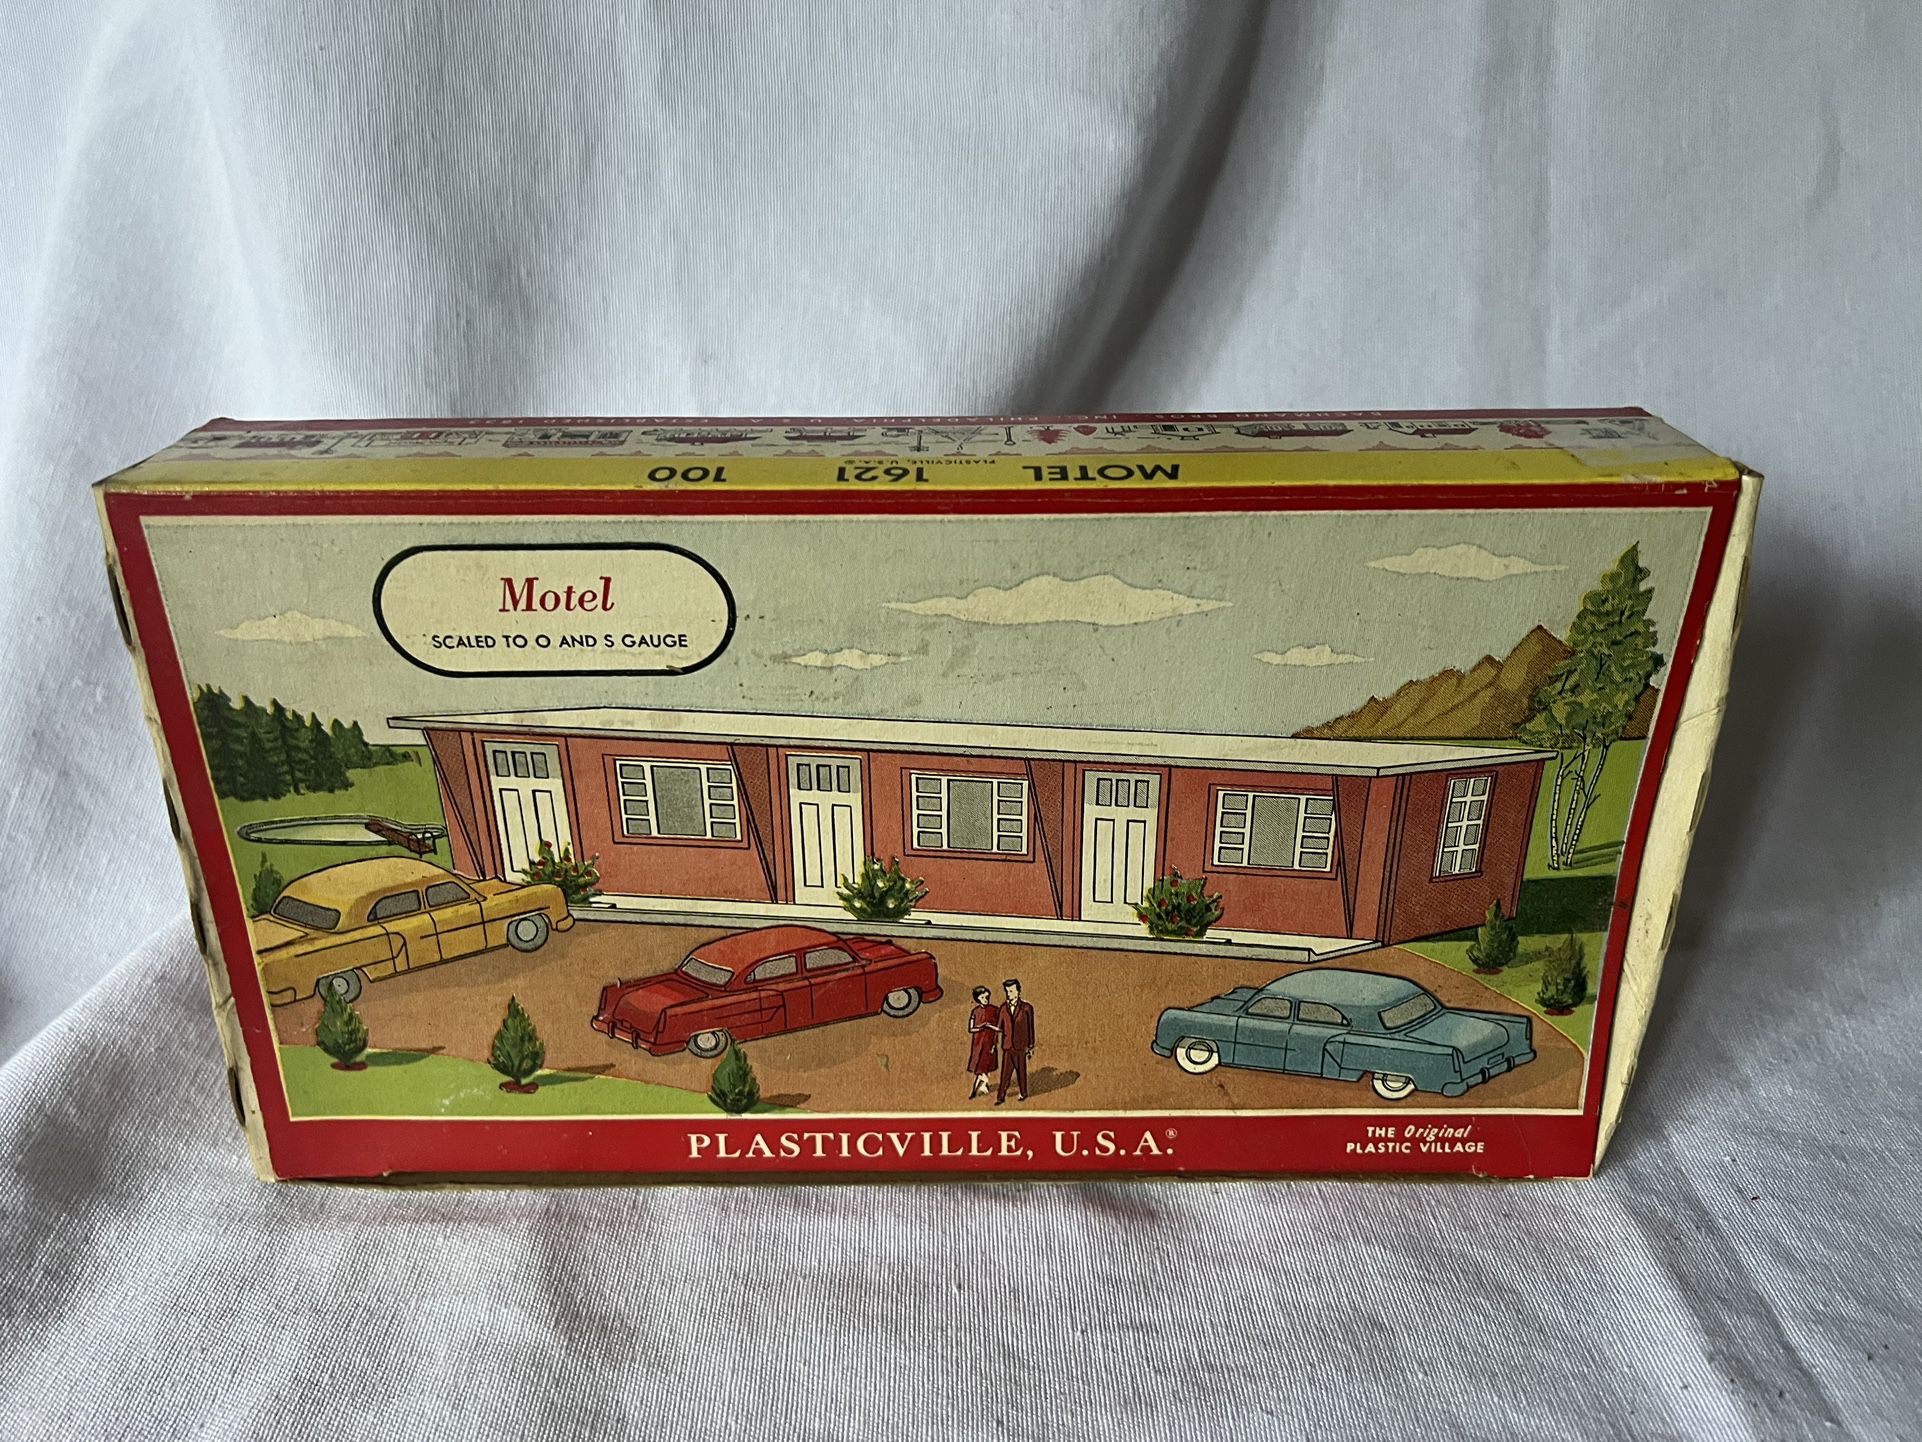 Vintage 1950’s Plasticville, USA Bachman Motel for train collector